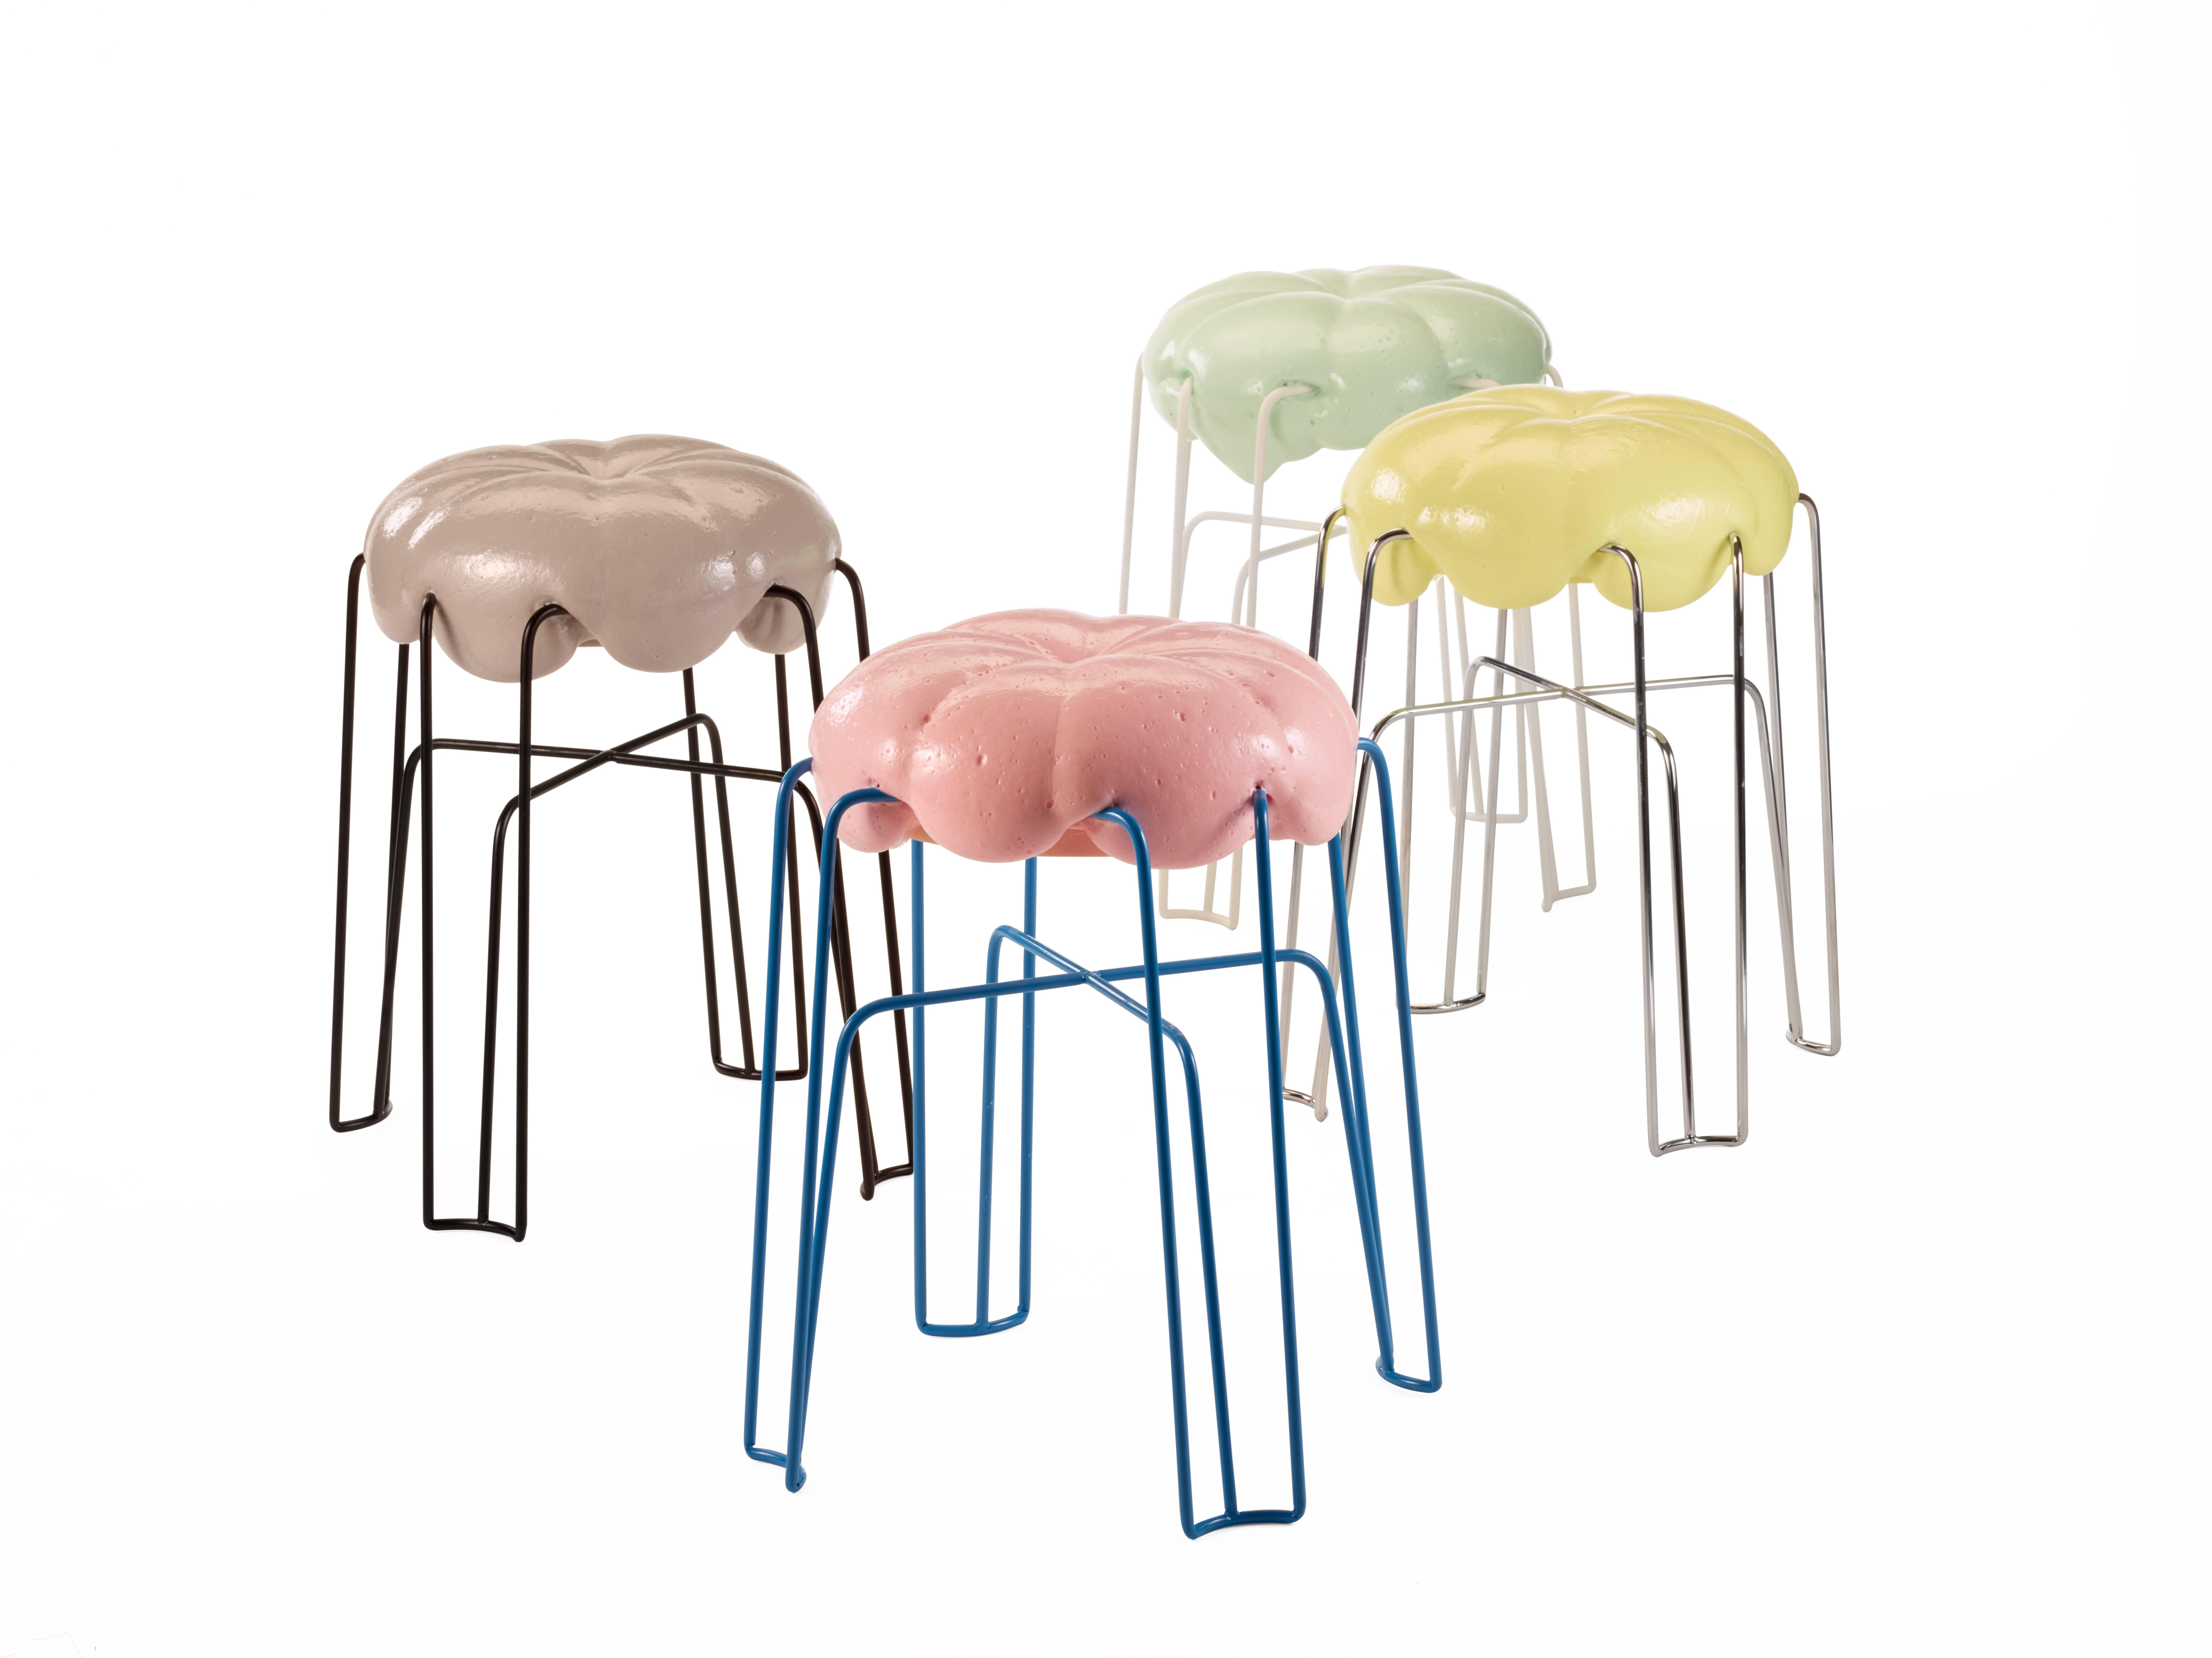 German Marshmallow Stool by Paul Ketz in Licorice Polyurethane Foam and Steel For Sale